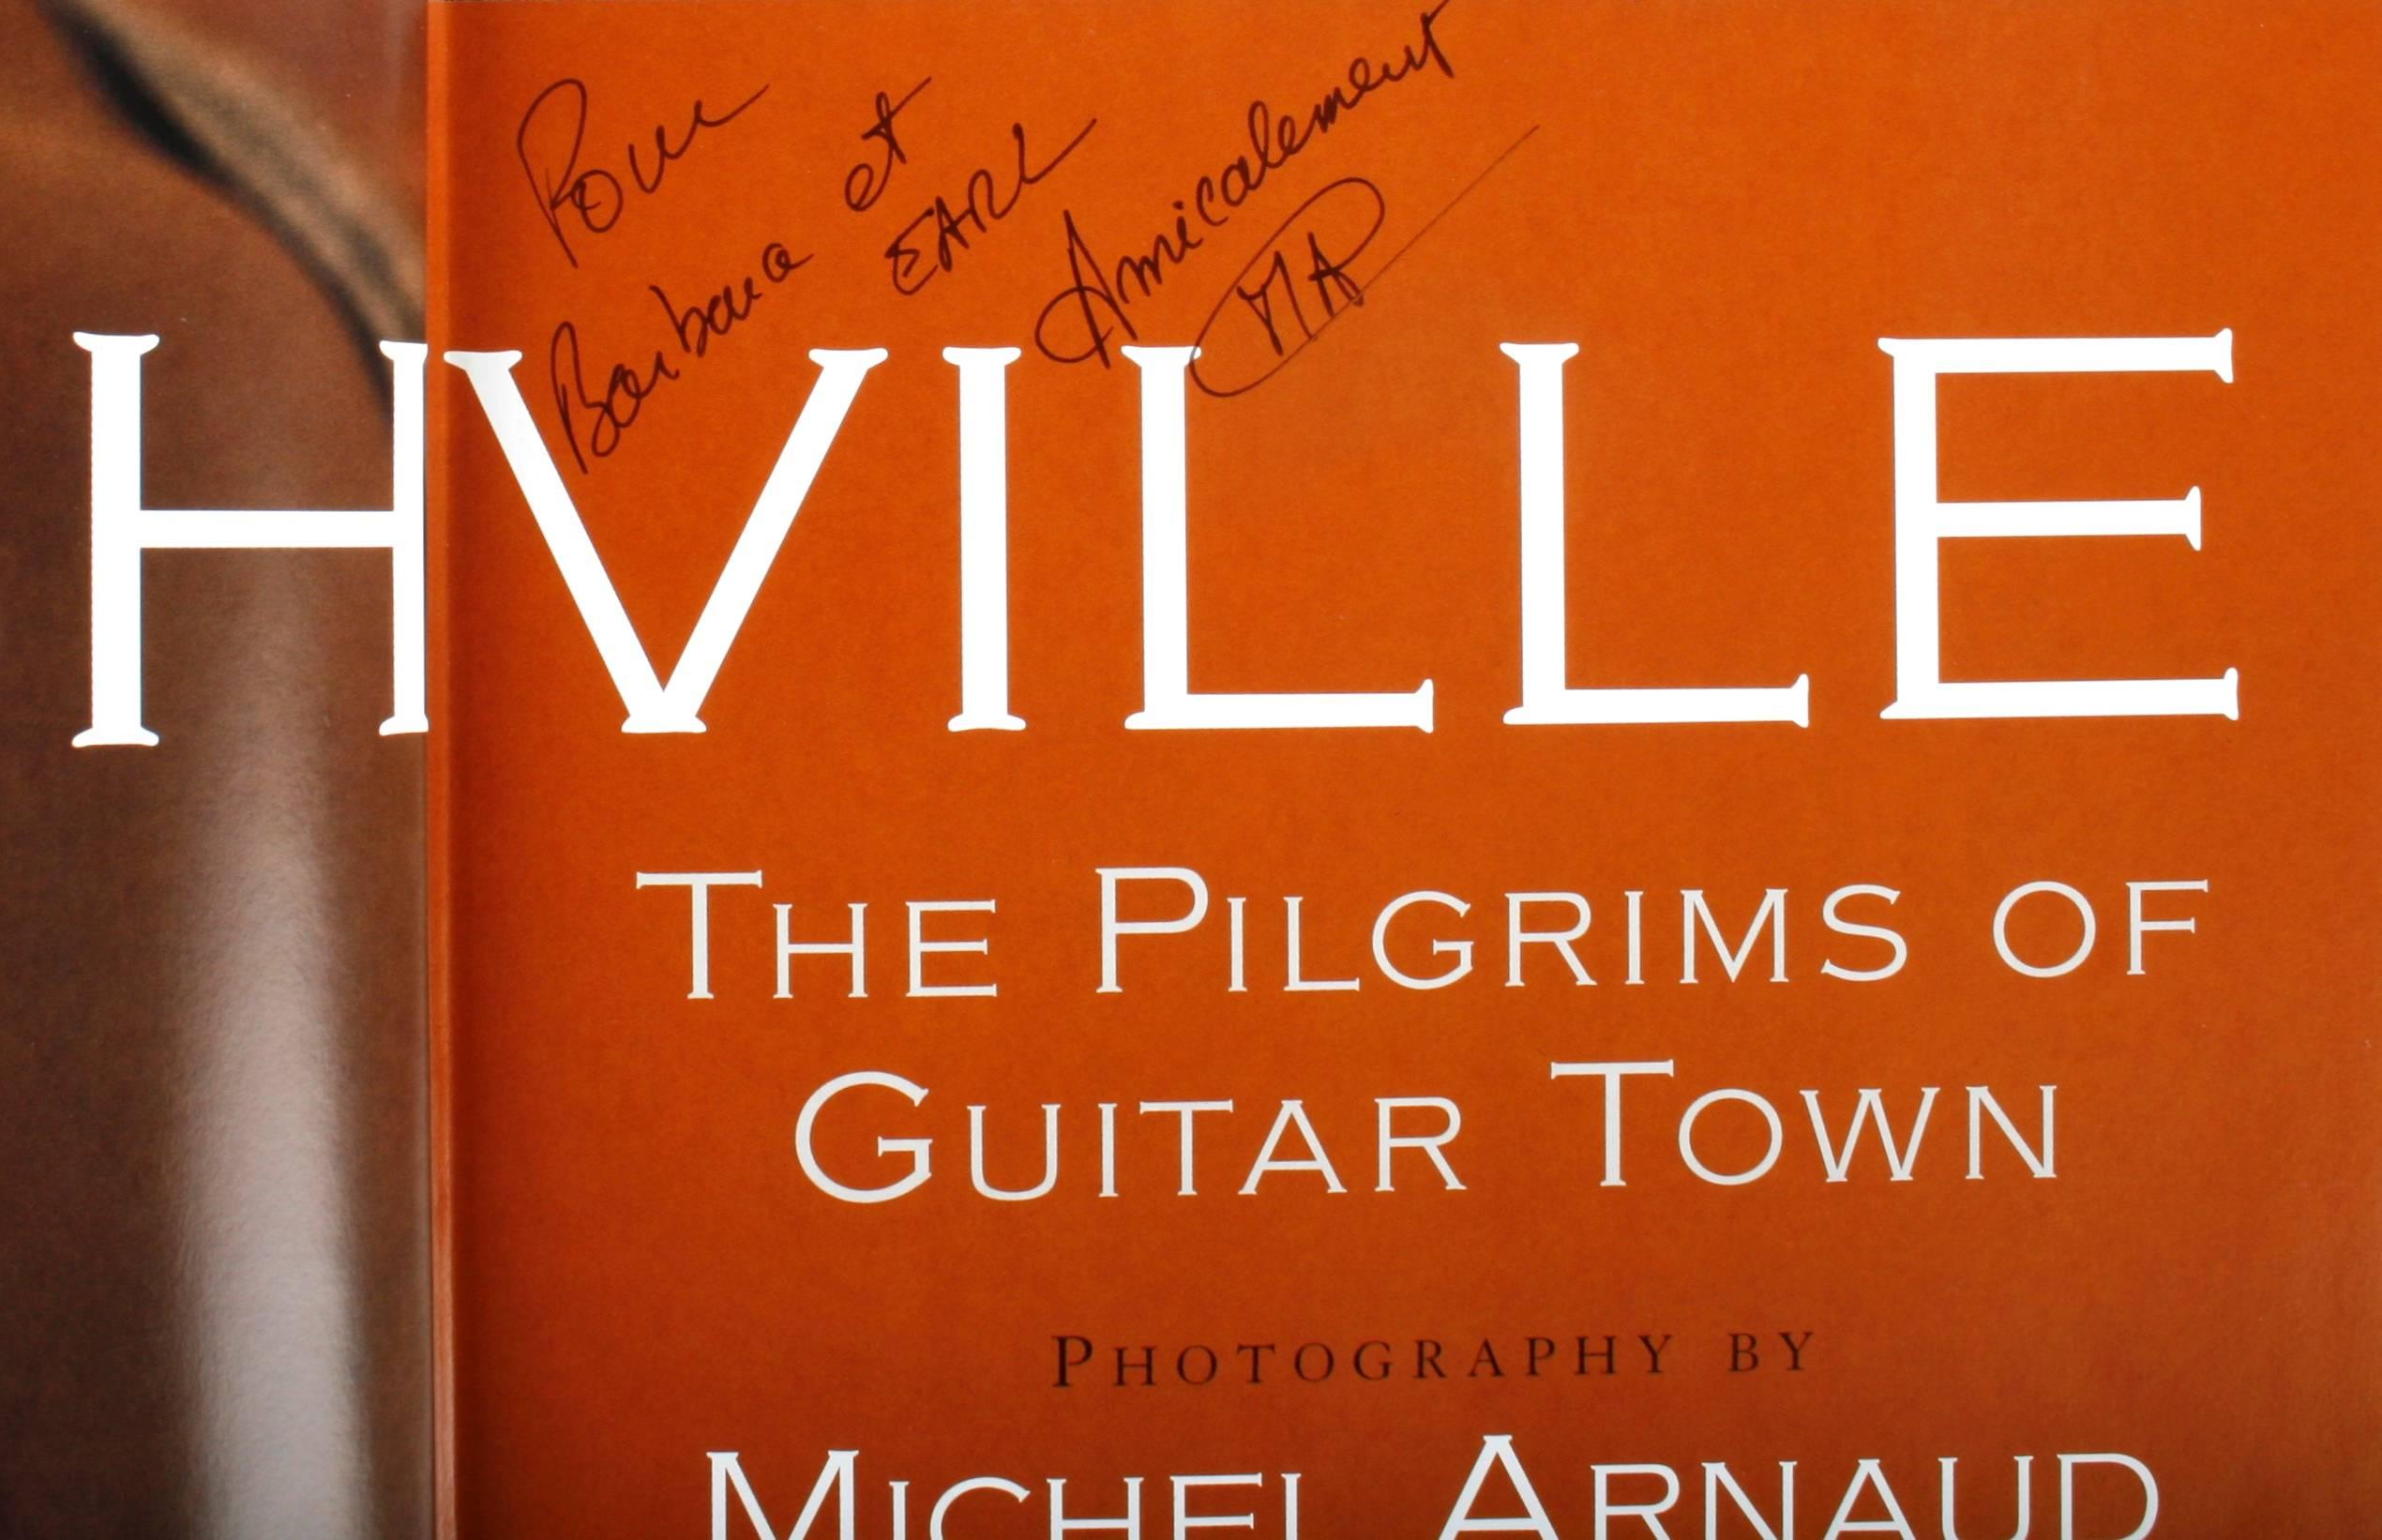 Nashville, The Pilgrims of Guitar Town by Michel Arnaud. New York: Stewart, Tabori and Chang, 2000. Signed and inscribed by the author first edition hardcover with dust jacket. 148 pp. A handsome coffee table book with photographs by Michel Arnaud